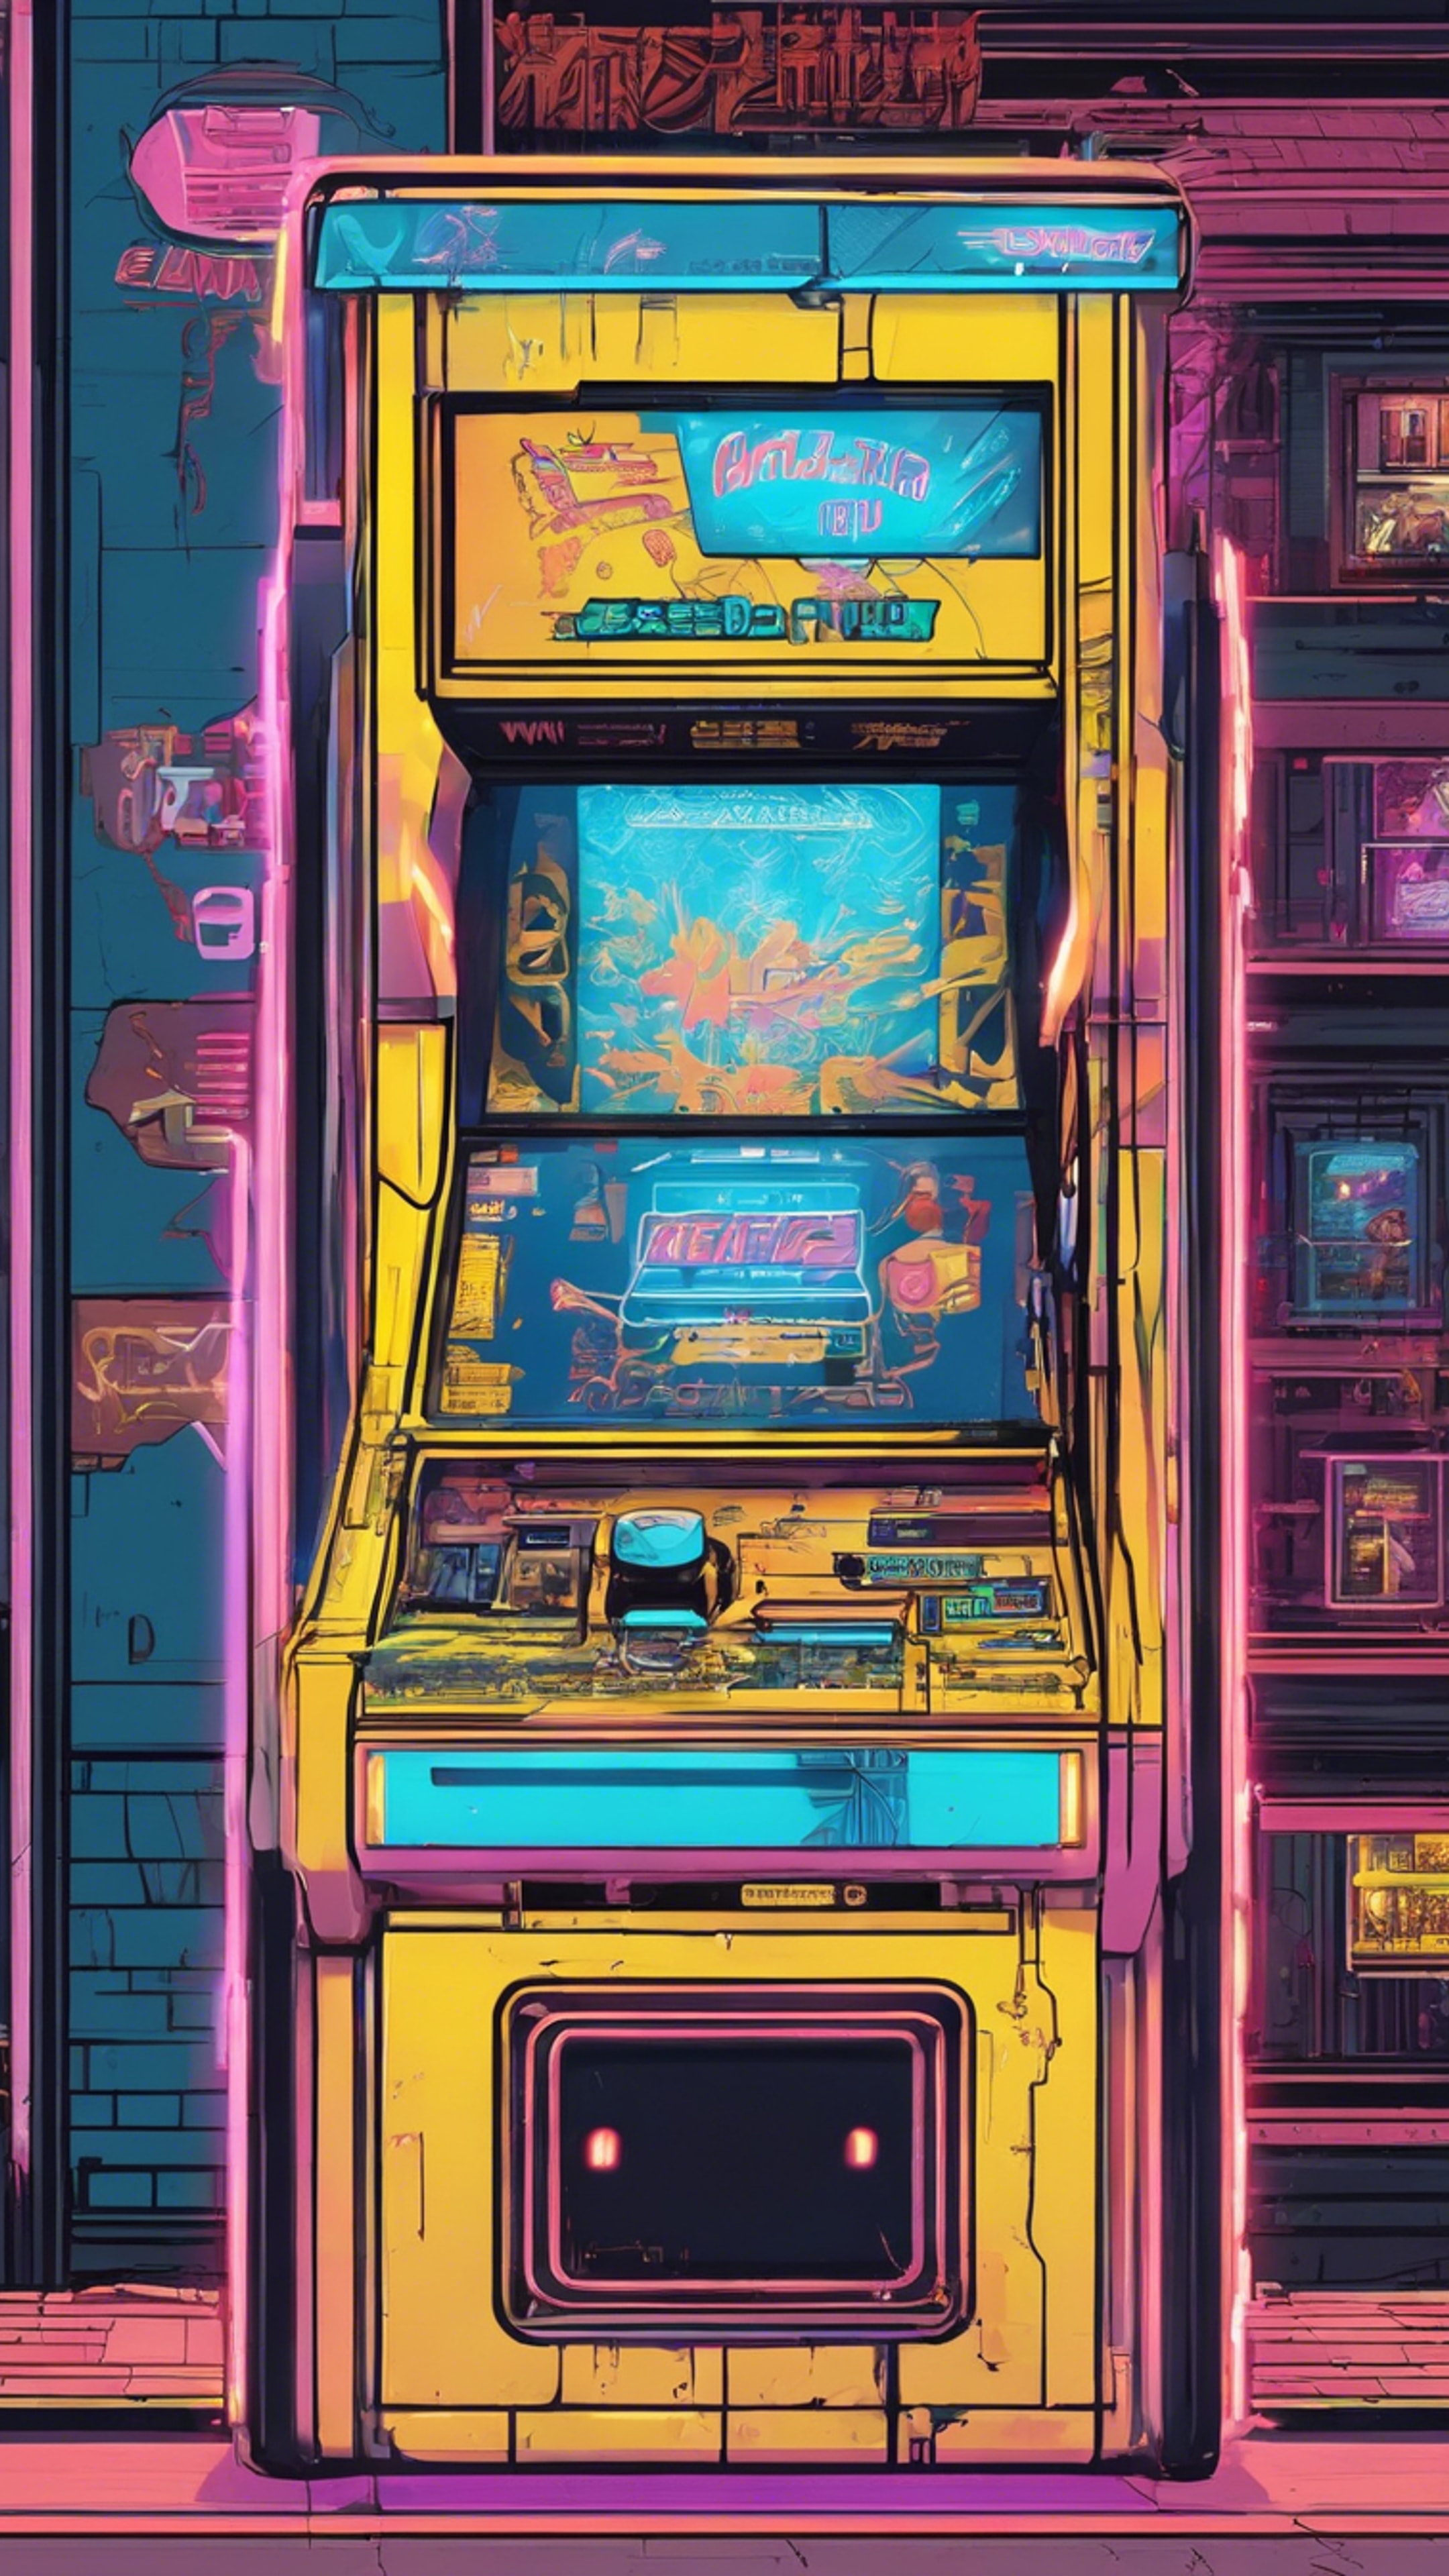 A vintage arcade machine with blue and yellow detailing, set in a retro game shop. ورق الجدران[7a93d221b5de45b8b20a]